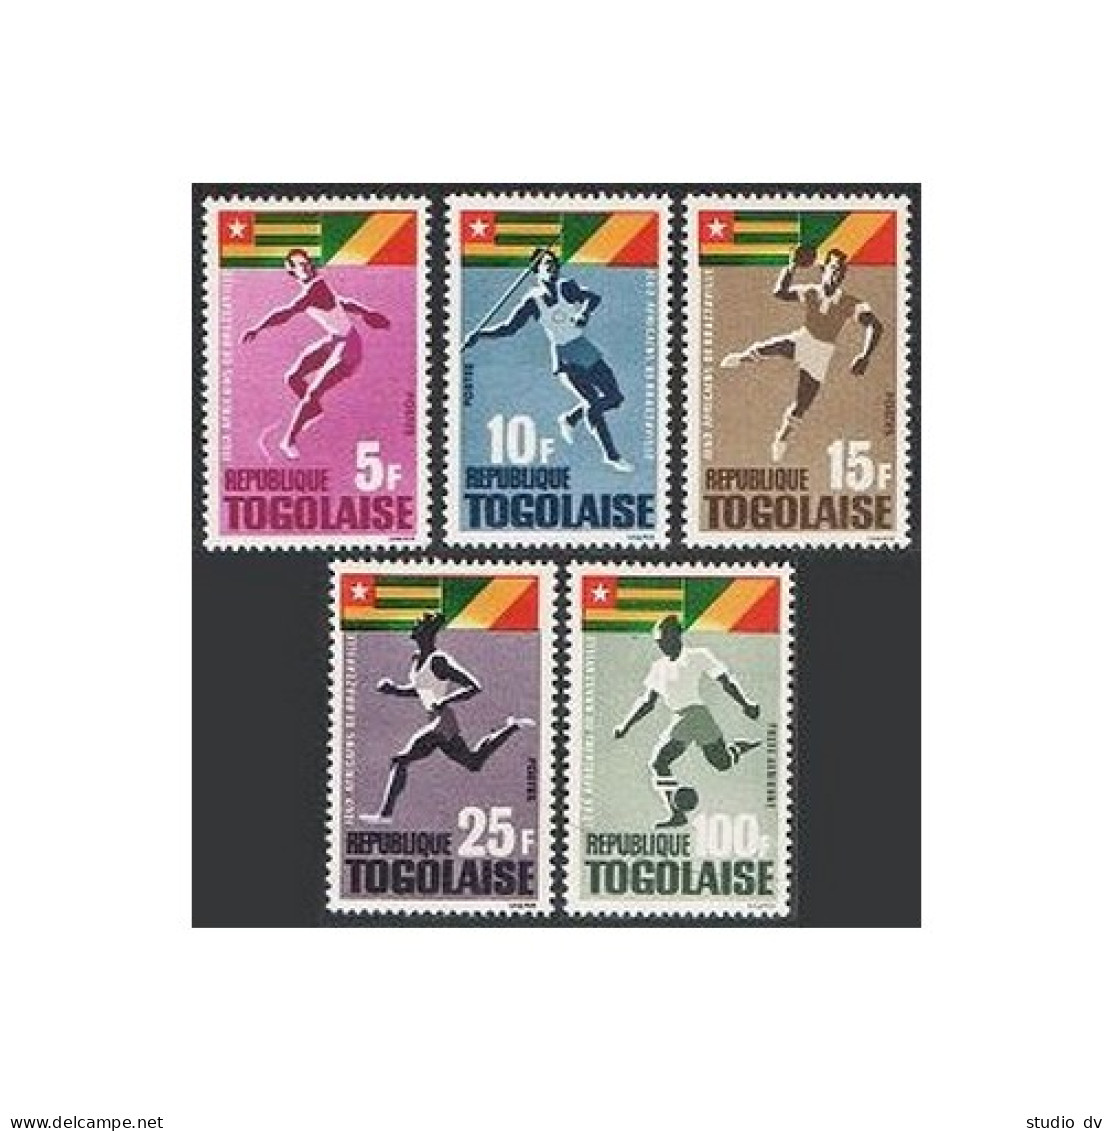 Togo 525-528,C46,MNH.Michel 467-471.African Games,1965.Discus,Javelin,Soccer, - Togo (1960-...)